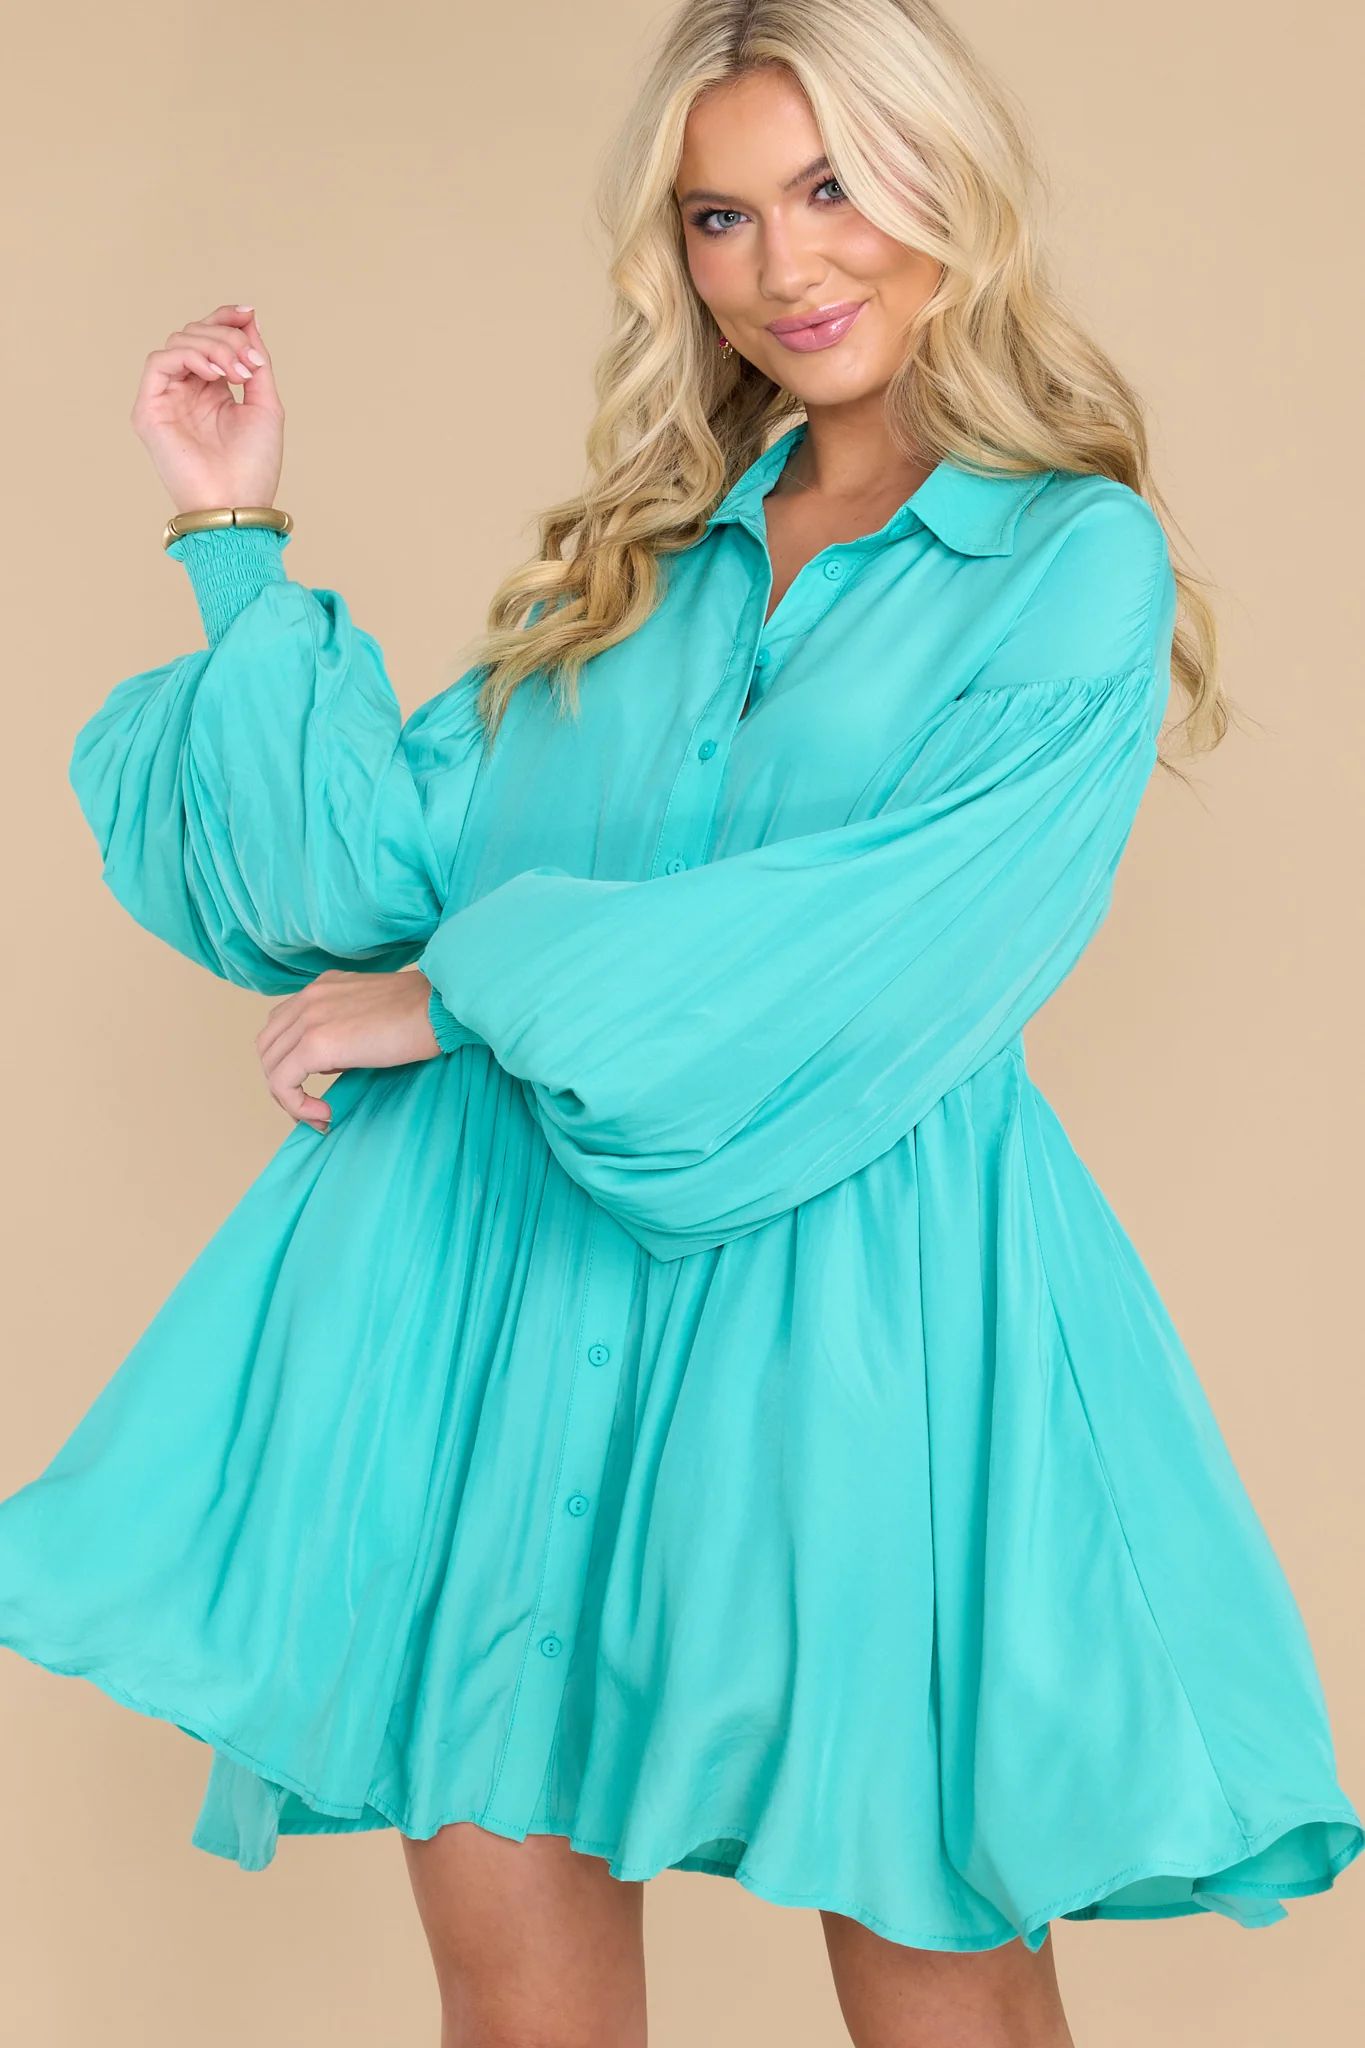 Forget Your Troubles Turquoise Dress | Red Dress 